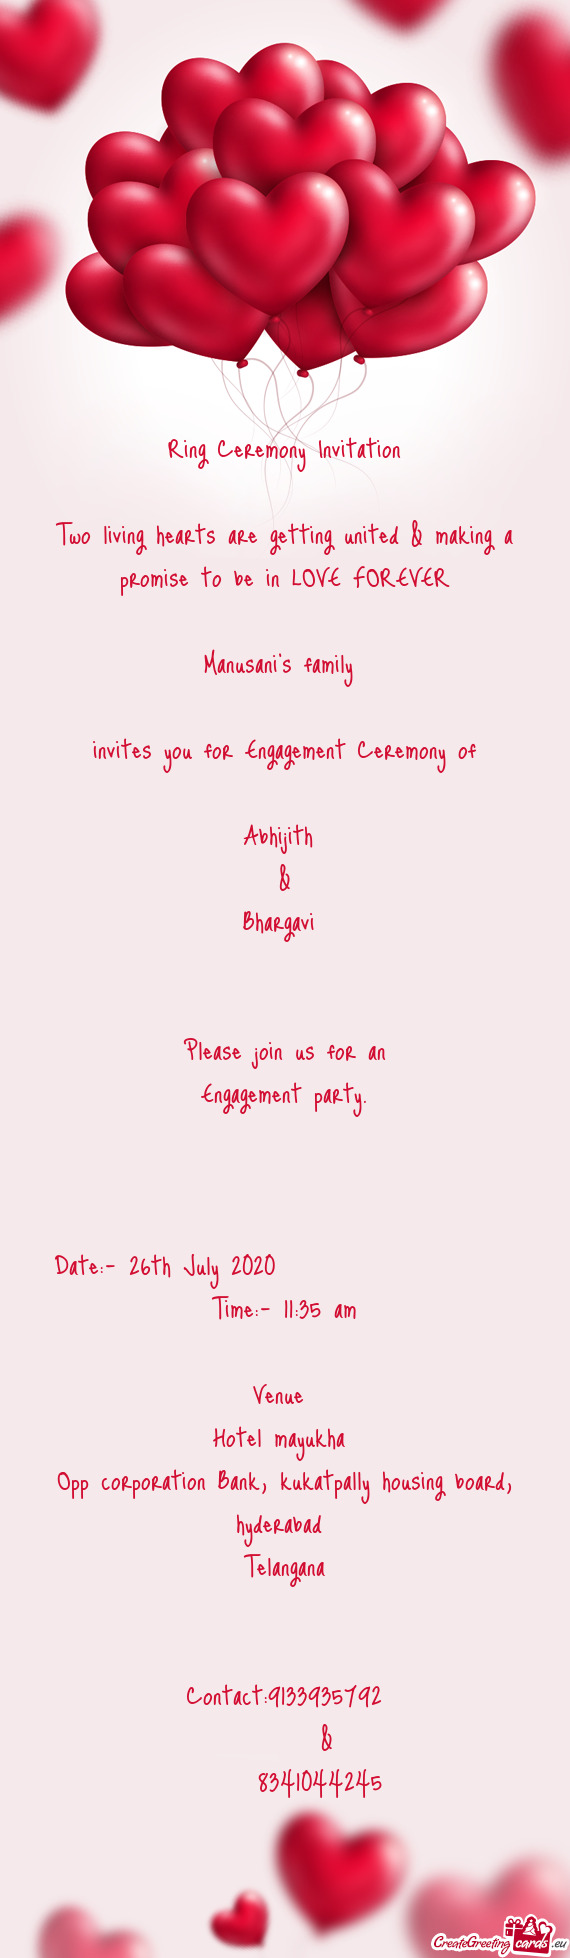 Please join us for an
 Engagement party